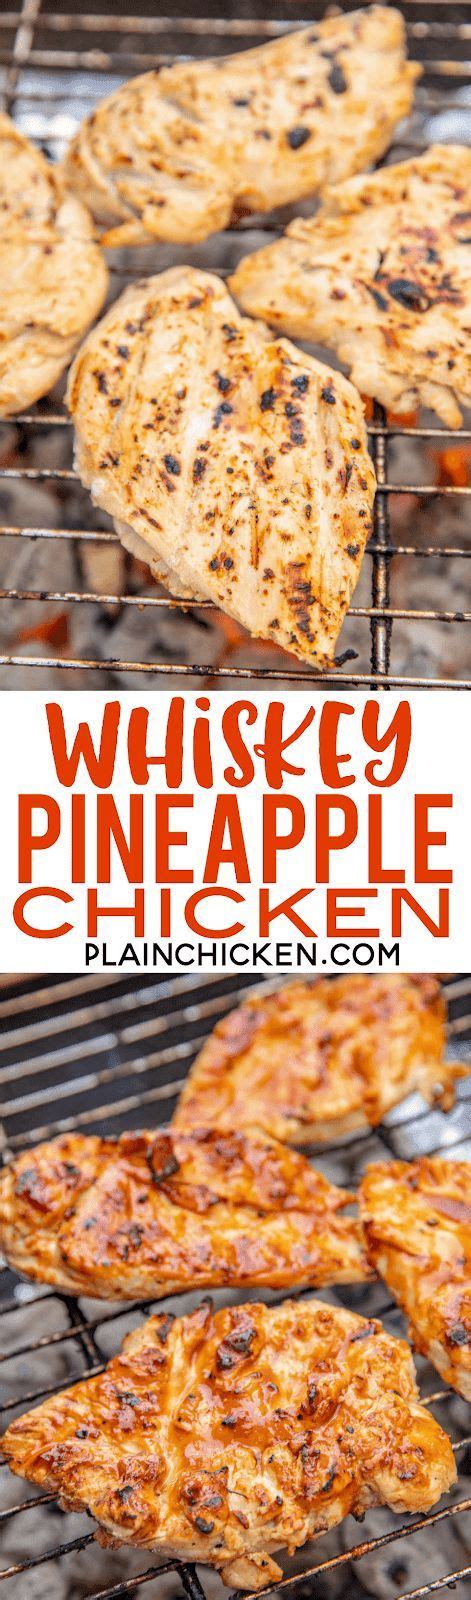 He is the author of love your leftovers and has contributed to simply recipes since 2017. Whiskey Pineapple Chicken | Plain Chicken | Yummy chicken ...